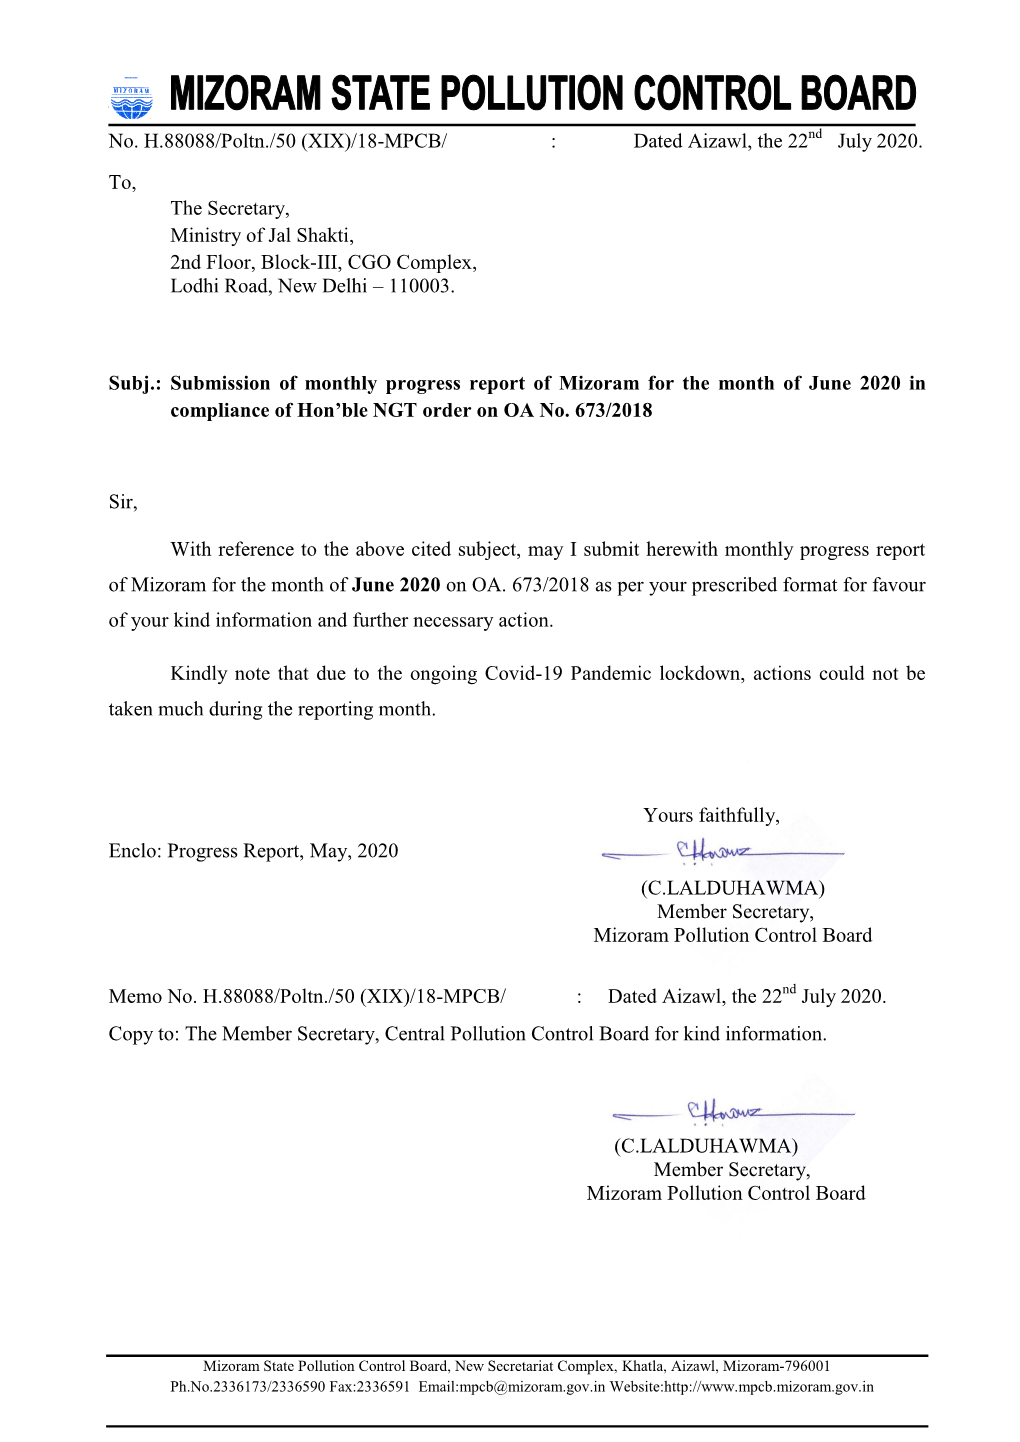 June 2020 in Compliance of Hon’Ble NGT Order on OA No